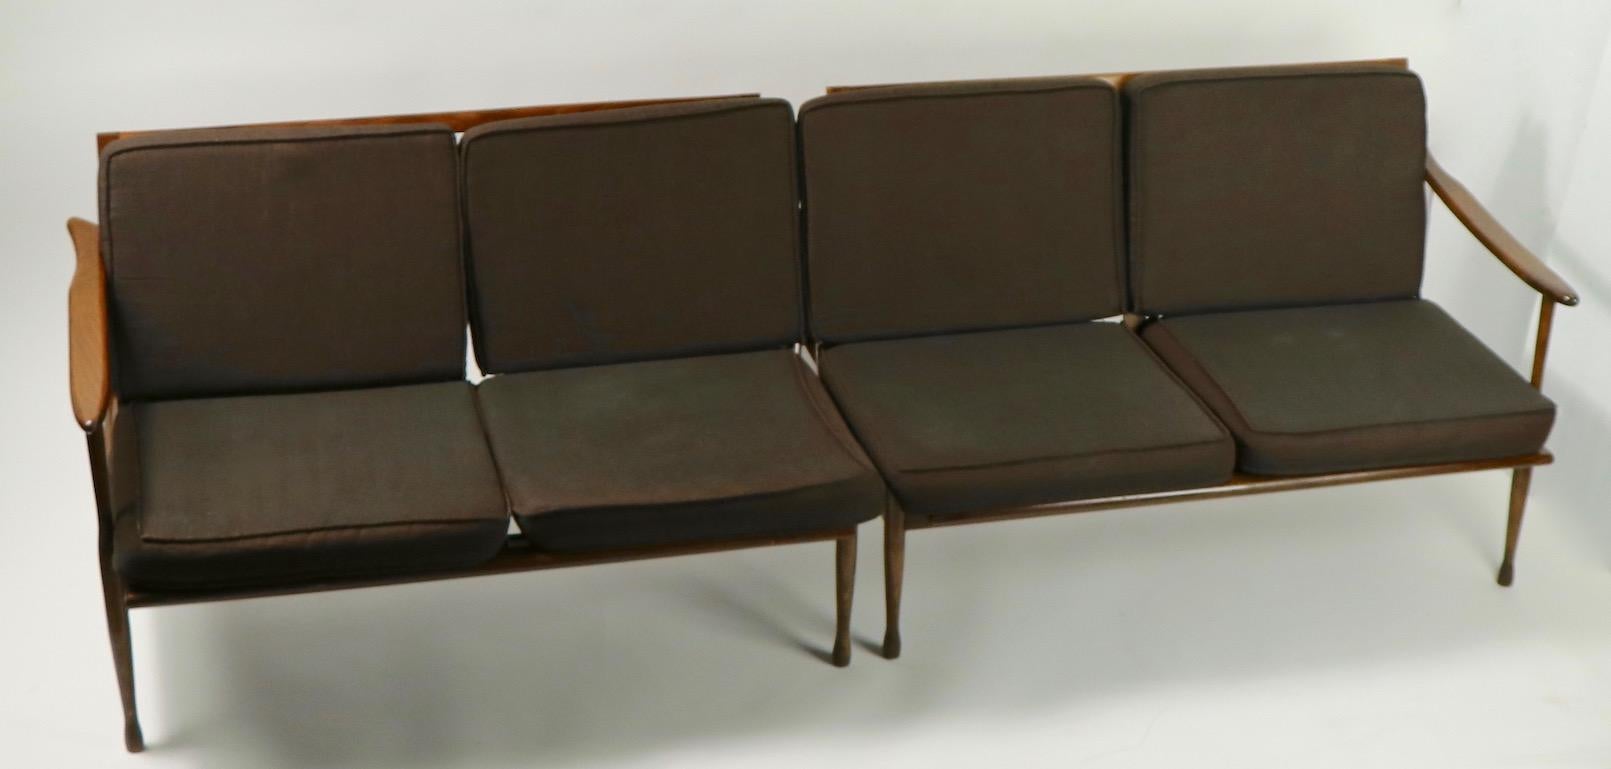 Interesting sectional sofa marked made in Italy that exhibits obvious reference to Danish modern design. Open arm frames support loose cushion upholstery, original fabric which shows normal cosmetic wear consistent with age. This is a sectional